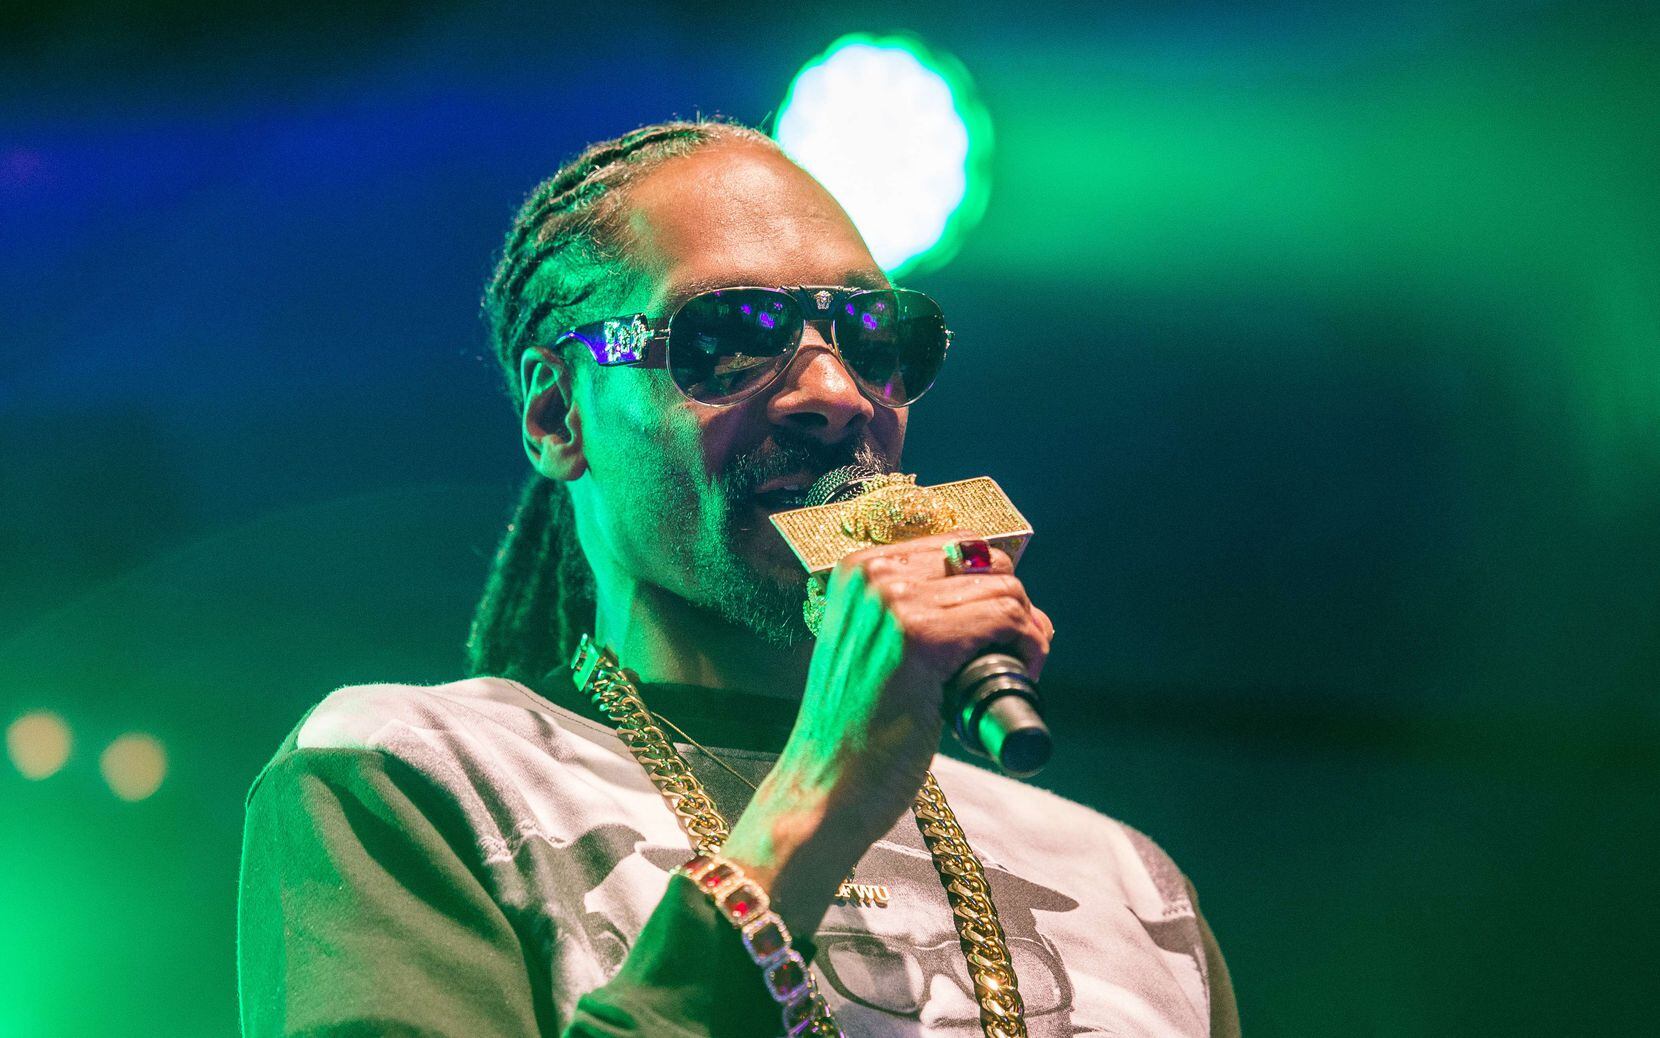 Snoop Doggy Dogg will perform with Wiz Khalifa and Too Short Aug. 20 at Dos Equis Pavilion...